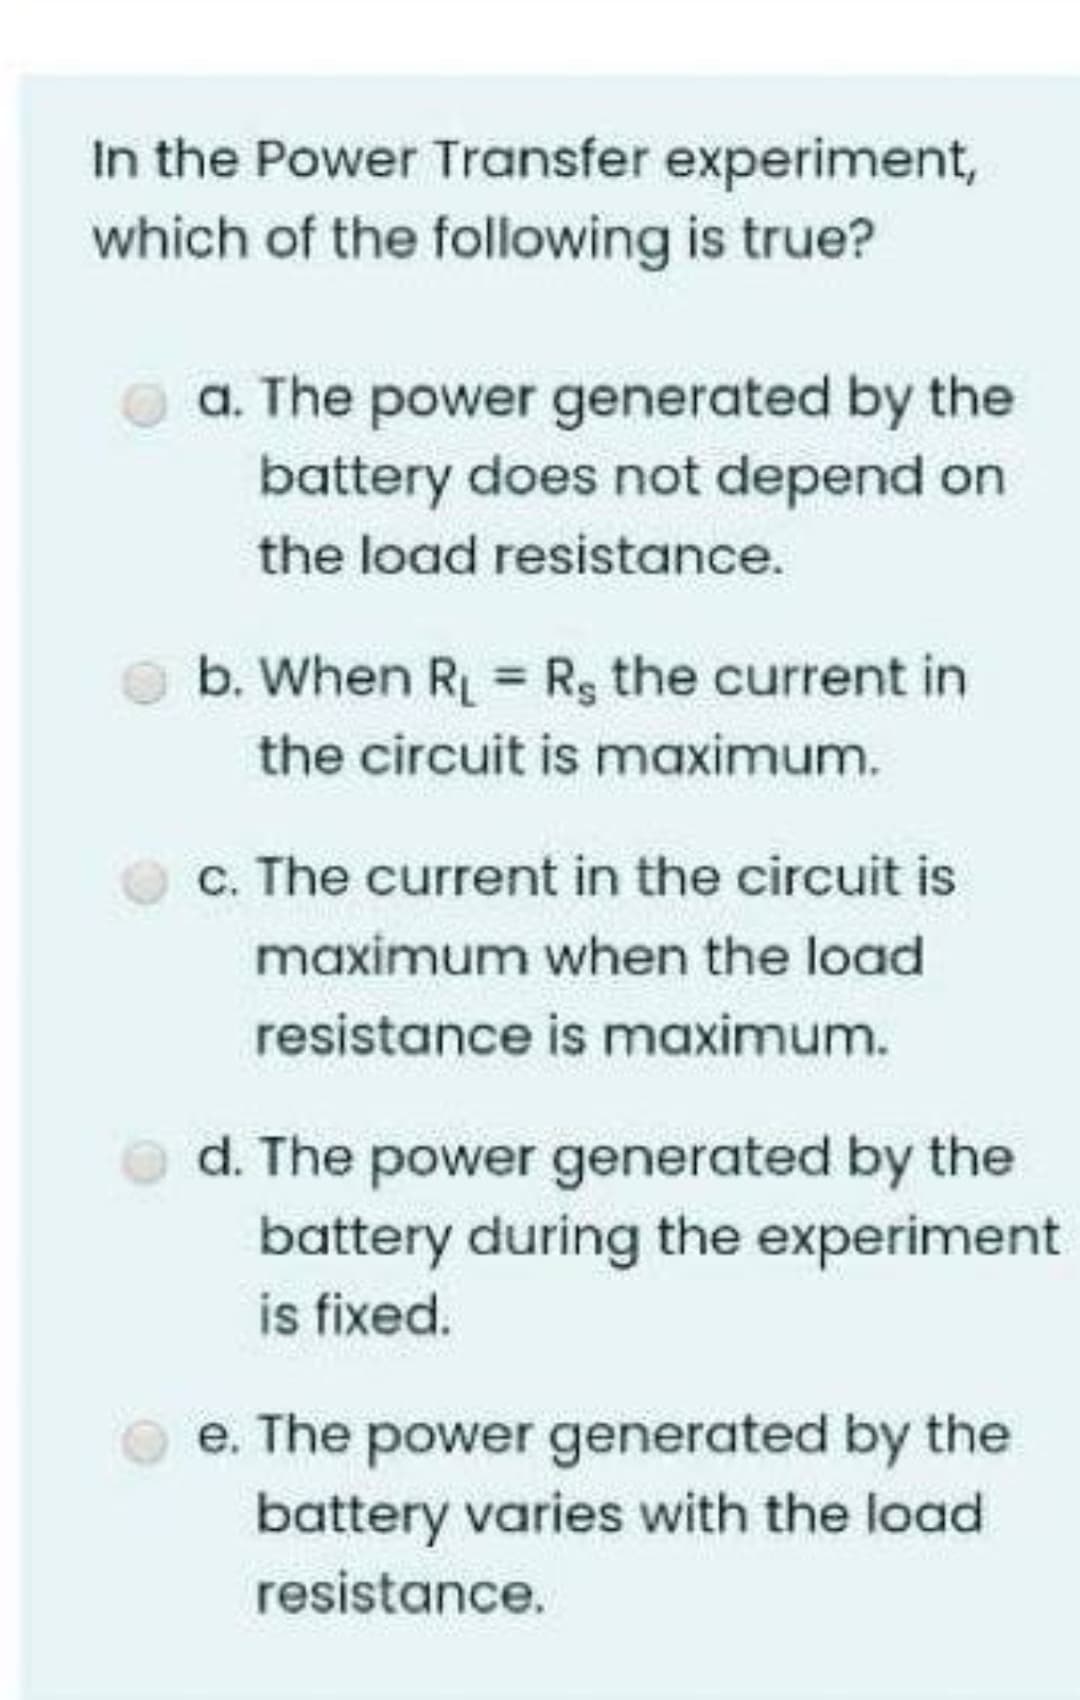 In the Power Transfer experiment,
which of the following is true?
a. The power generated by the
battery does not depend on
the load resistance.
b. When R = Rg the current in
the circuit is maximum.
c. The current in the circuit is
maximum when the load
resistance is maximum.
d. The power generated by the
battery during the experiment
is fixed.
e. The power generated by the
battery varies with the load
resistance.
